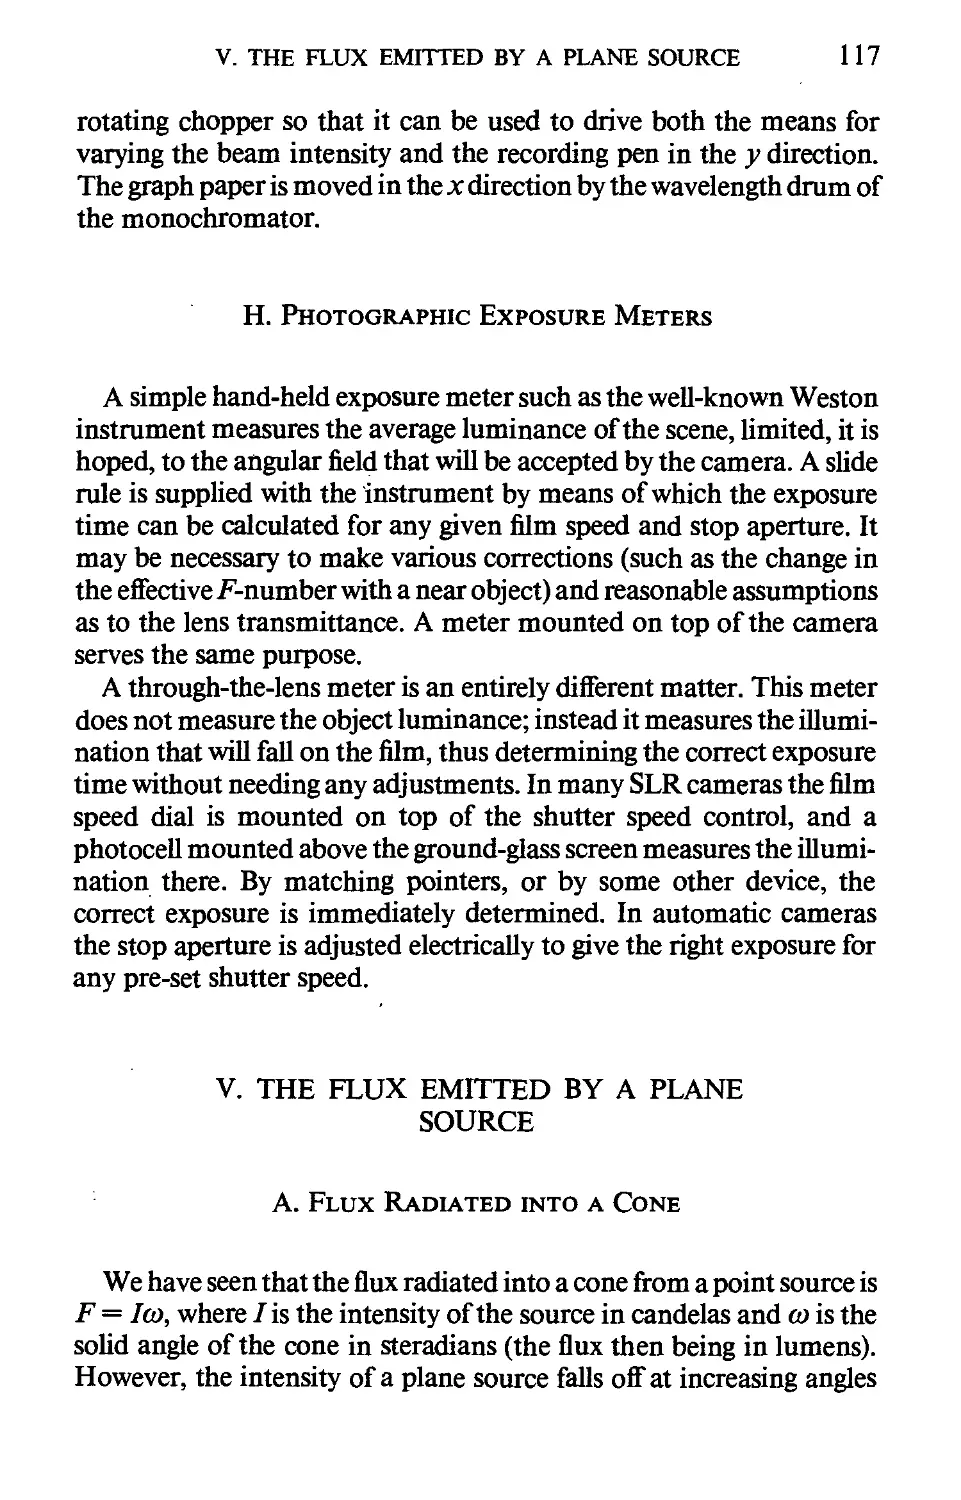 H. Photographic Exposure Meters
V. The Flux Emitted By A Plane Source